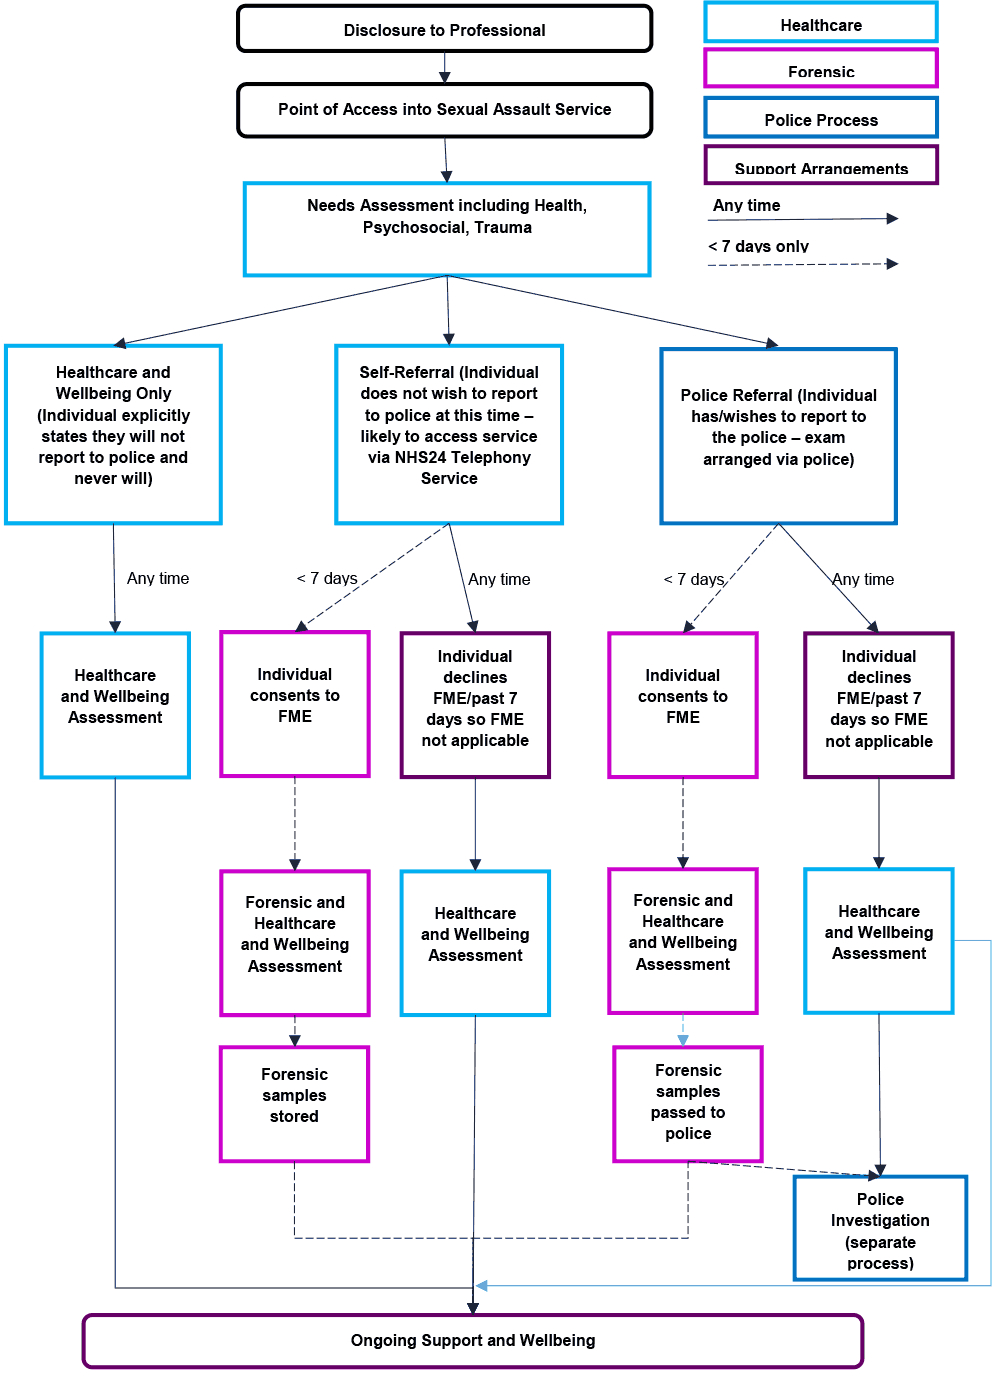 Following disclosure to professional, this is the point of access into Sexual Assault Service. A needs assessment then takes place; There are three routes available to an individual: Healthcare and wellbeing assessment only – individual states will never report to police Self-referral –where individual does not report to police at this time. If they consent to a FME forensic samples are stored. If they decline a FME or it is over 7 days, healthcare and wellbeing assessment only. Police Referral – where individual consents to FME and forensic samples are passed to police for investigation. If they decline FME or it is over 7 days, healthcare and wellbeing assessment only. All routes include follow up with ongoing support and wellbeing.